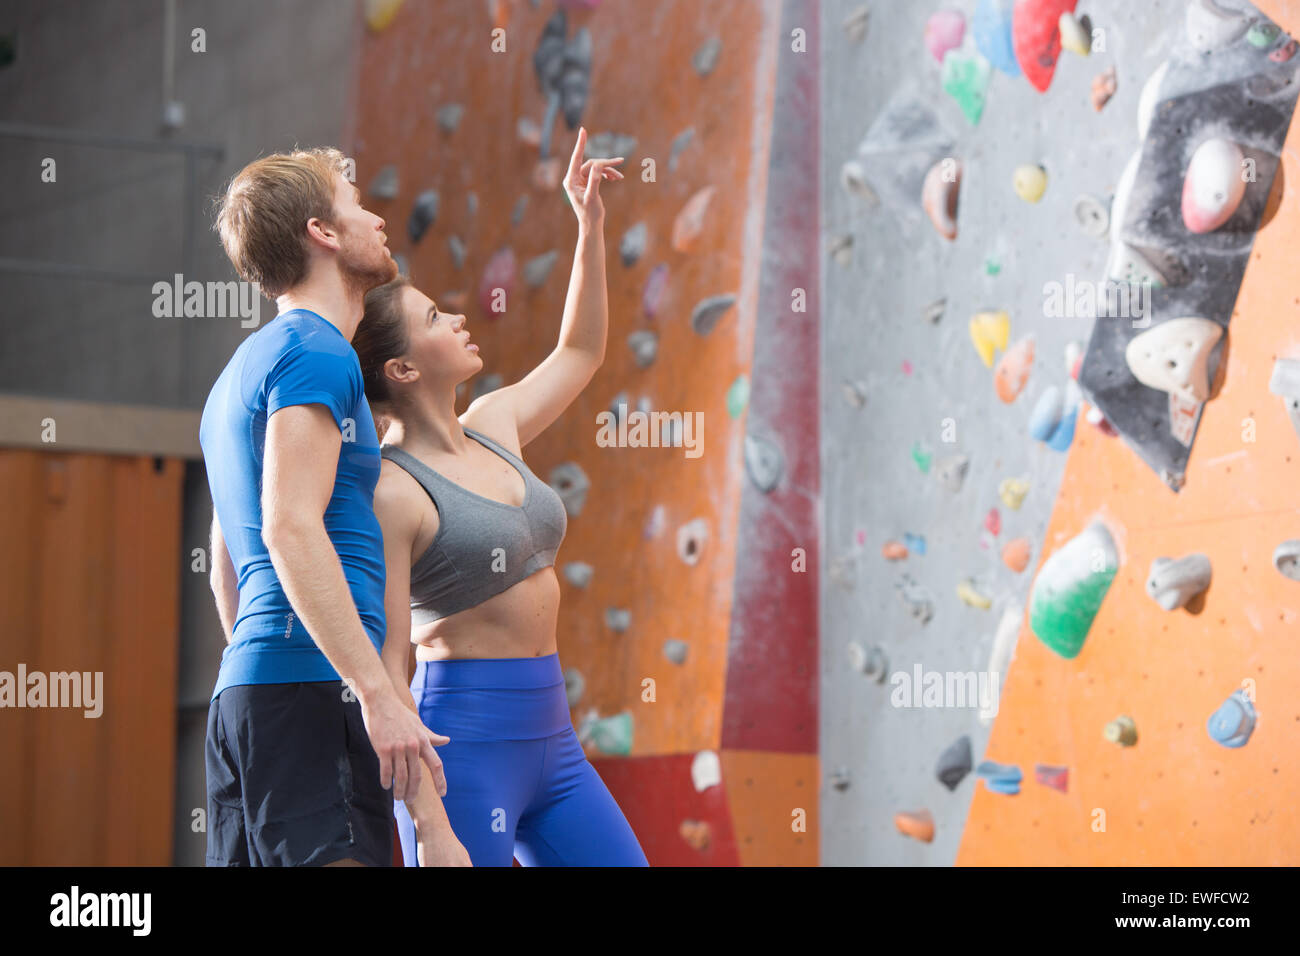 Man and woman discussing by climbing wall in crossfit gym Stock Photo